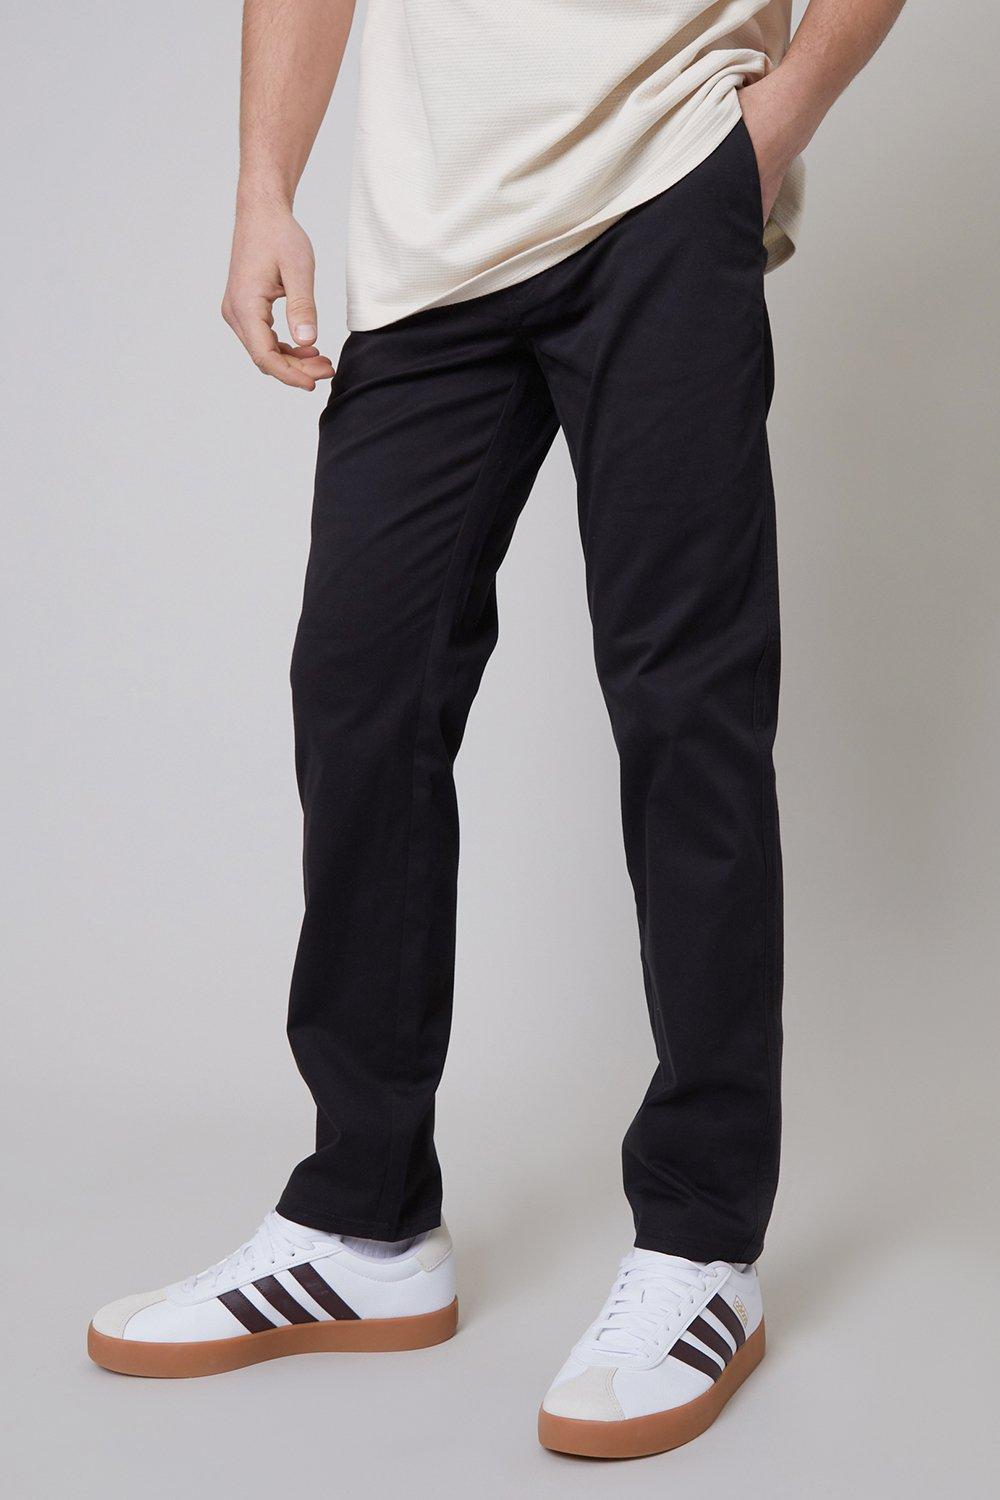 'Laurito' Cotton Regular Fit Chino Trousers with Stretch product